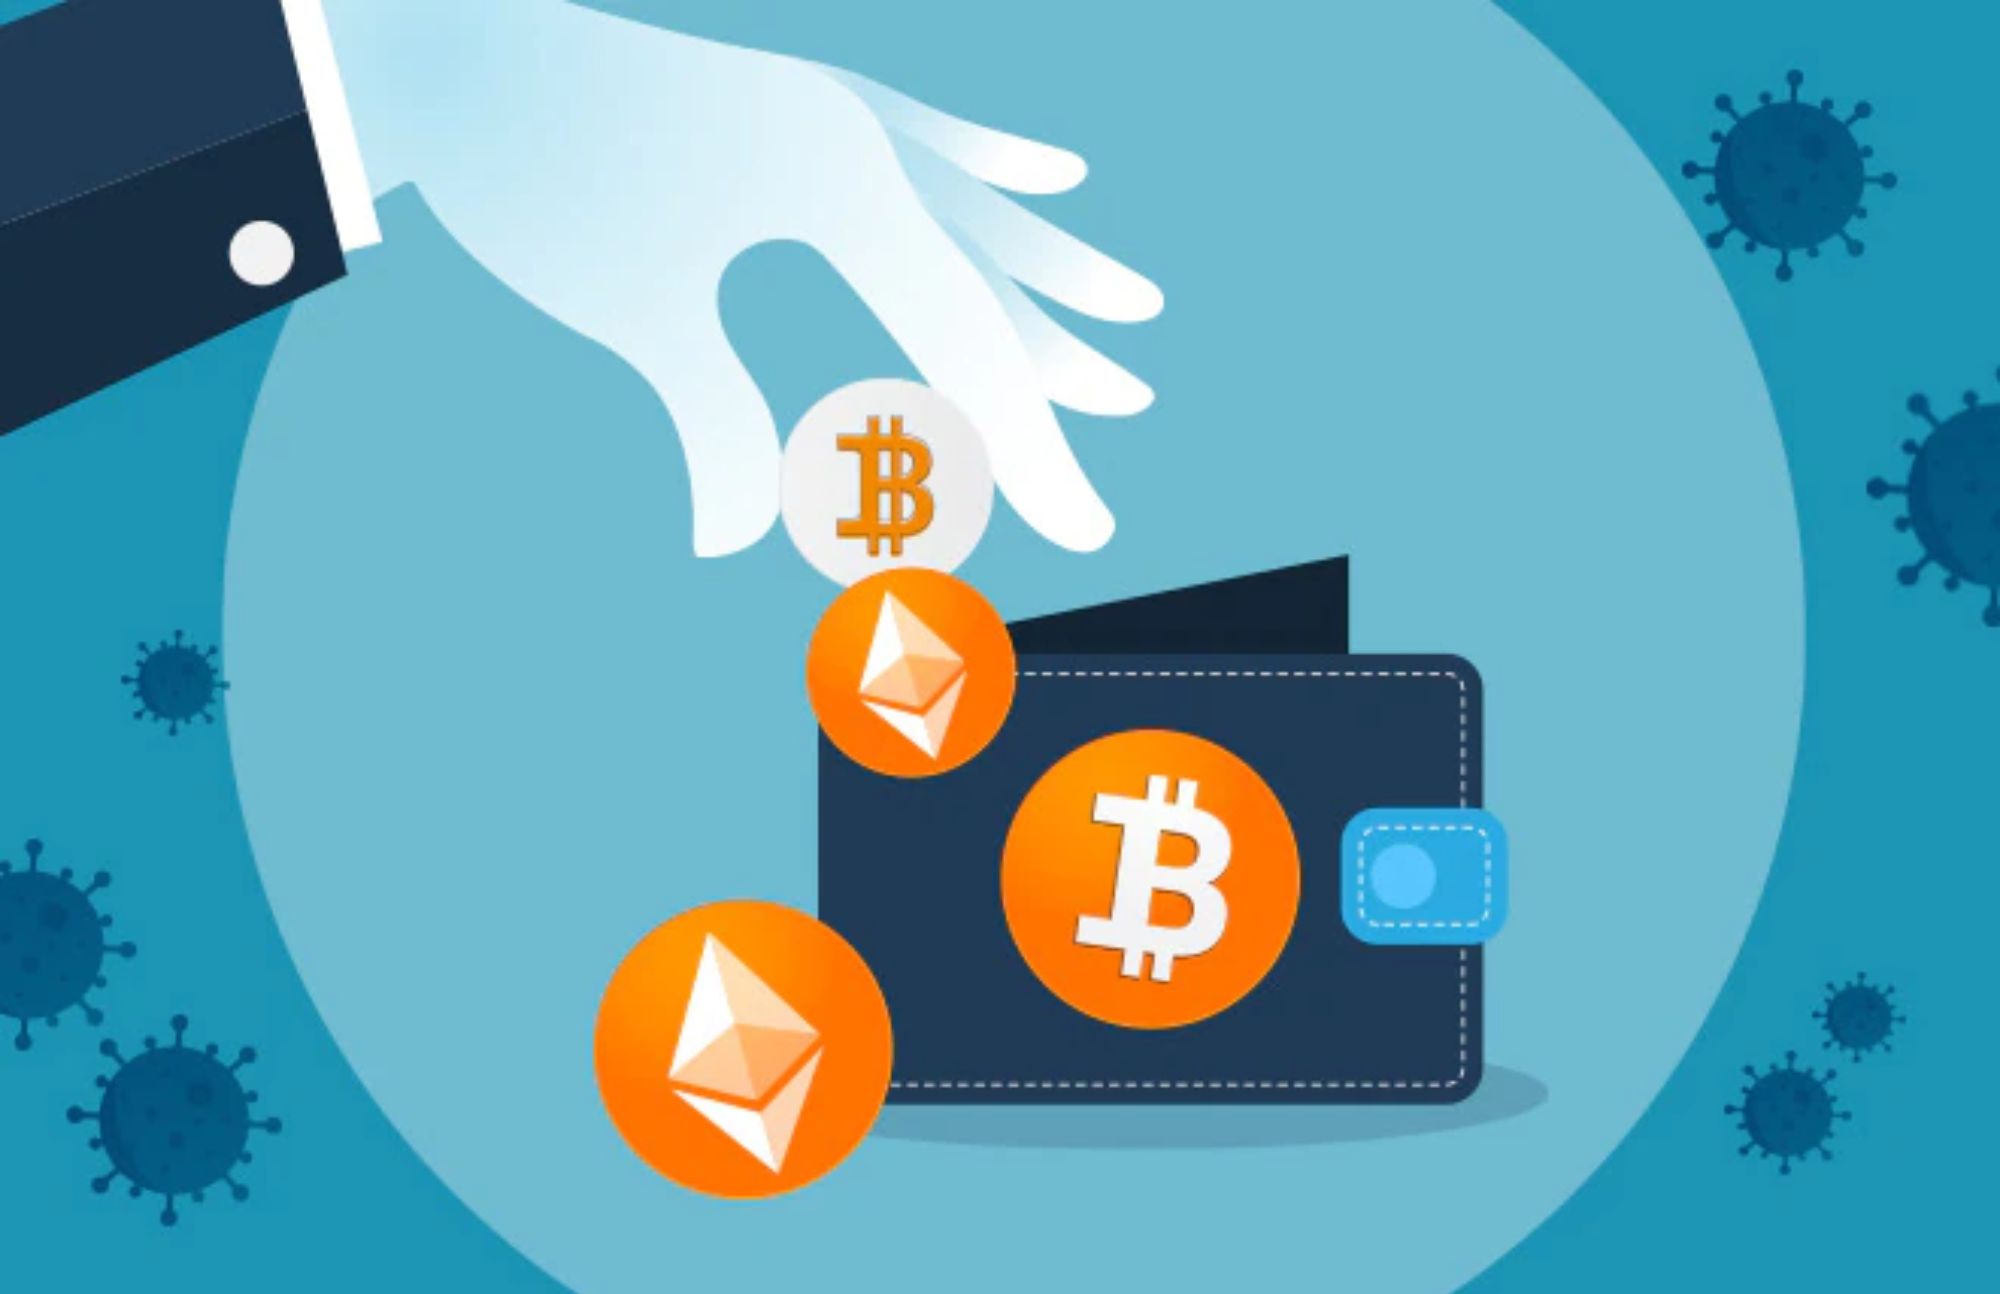 A hand inserting a bitcoin into a wallet containing two etherium coins